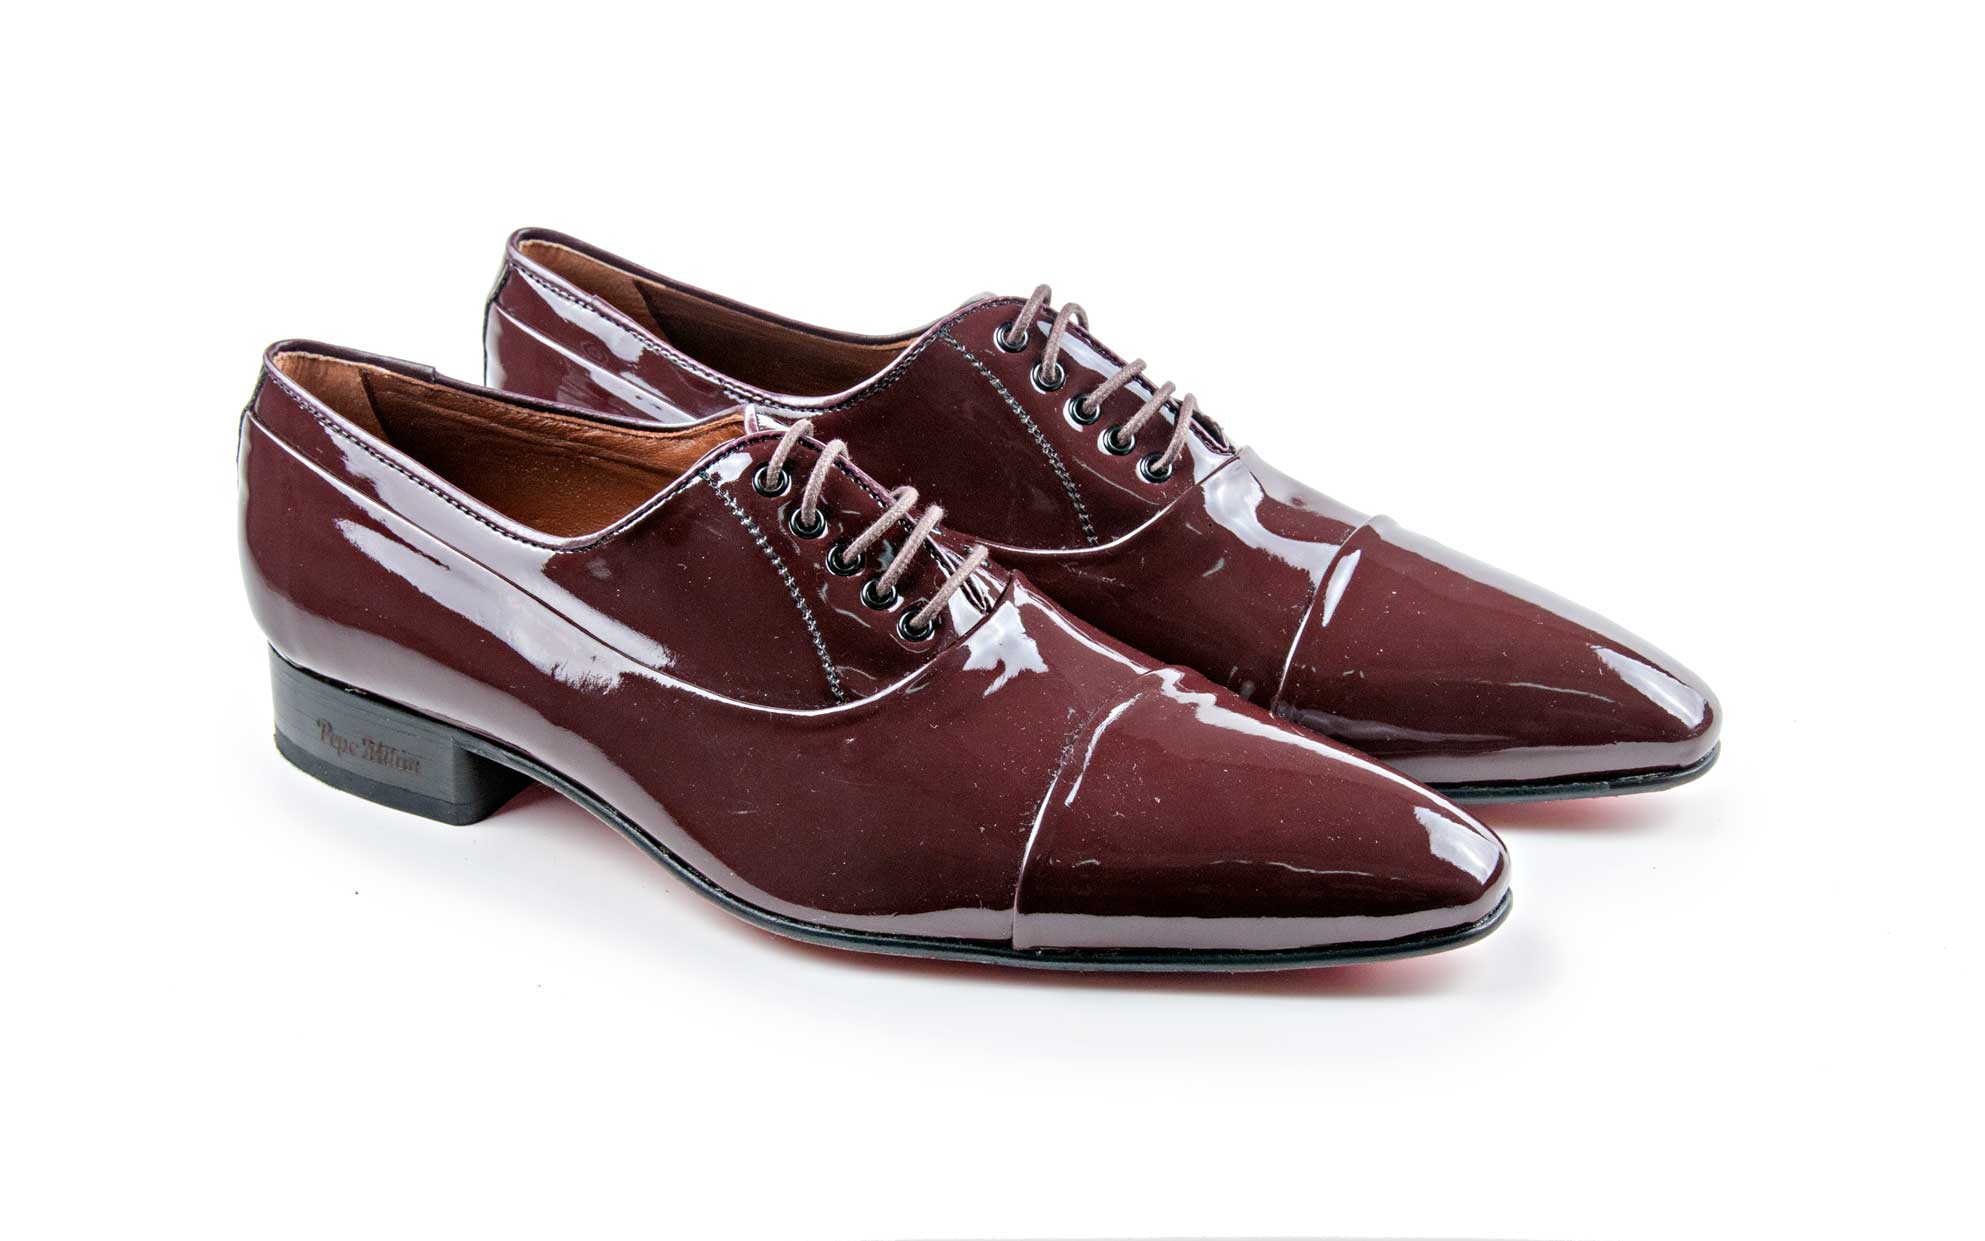 Marqués model shoe, made in burgundy patent leather.